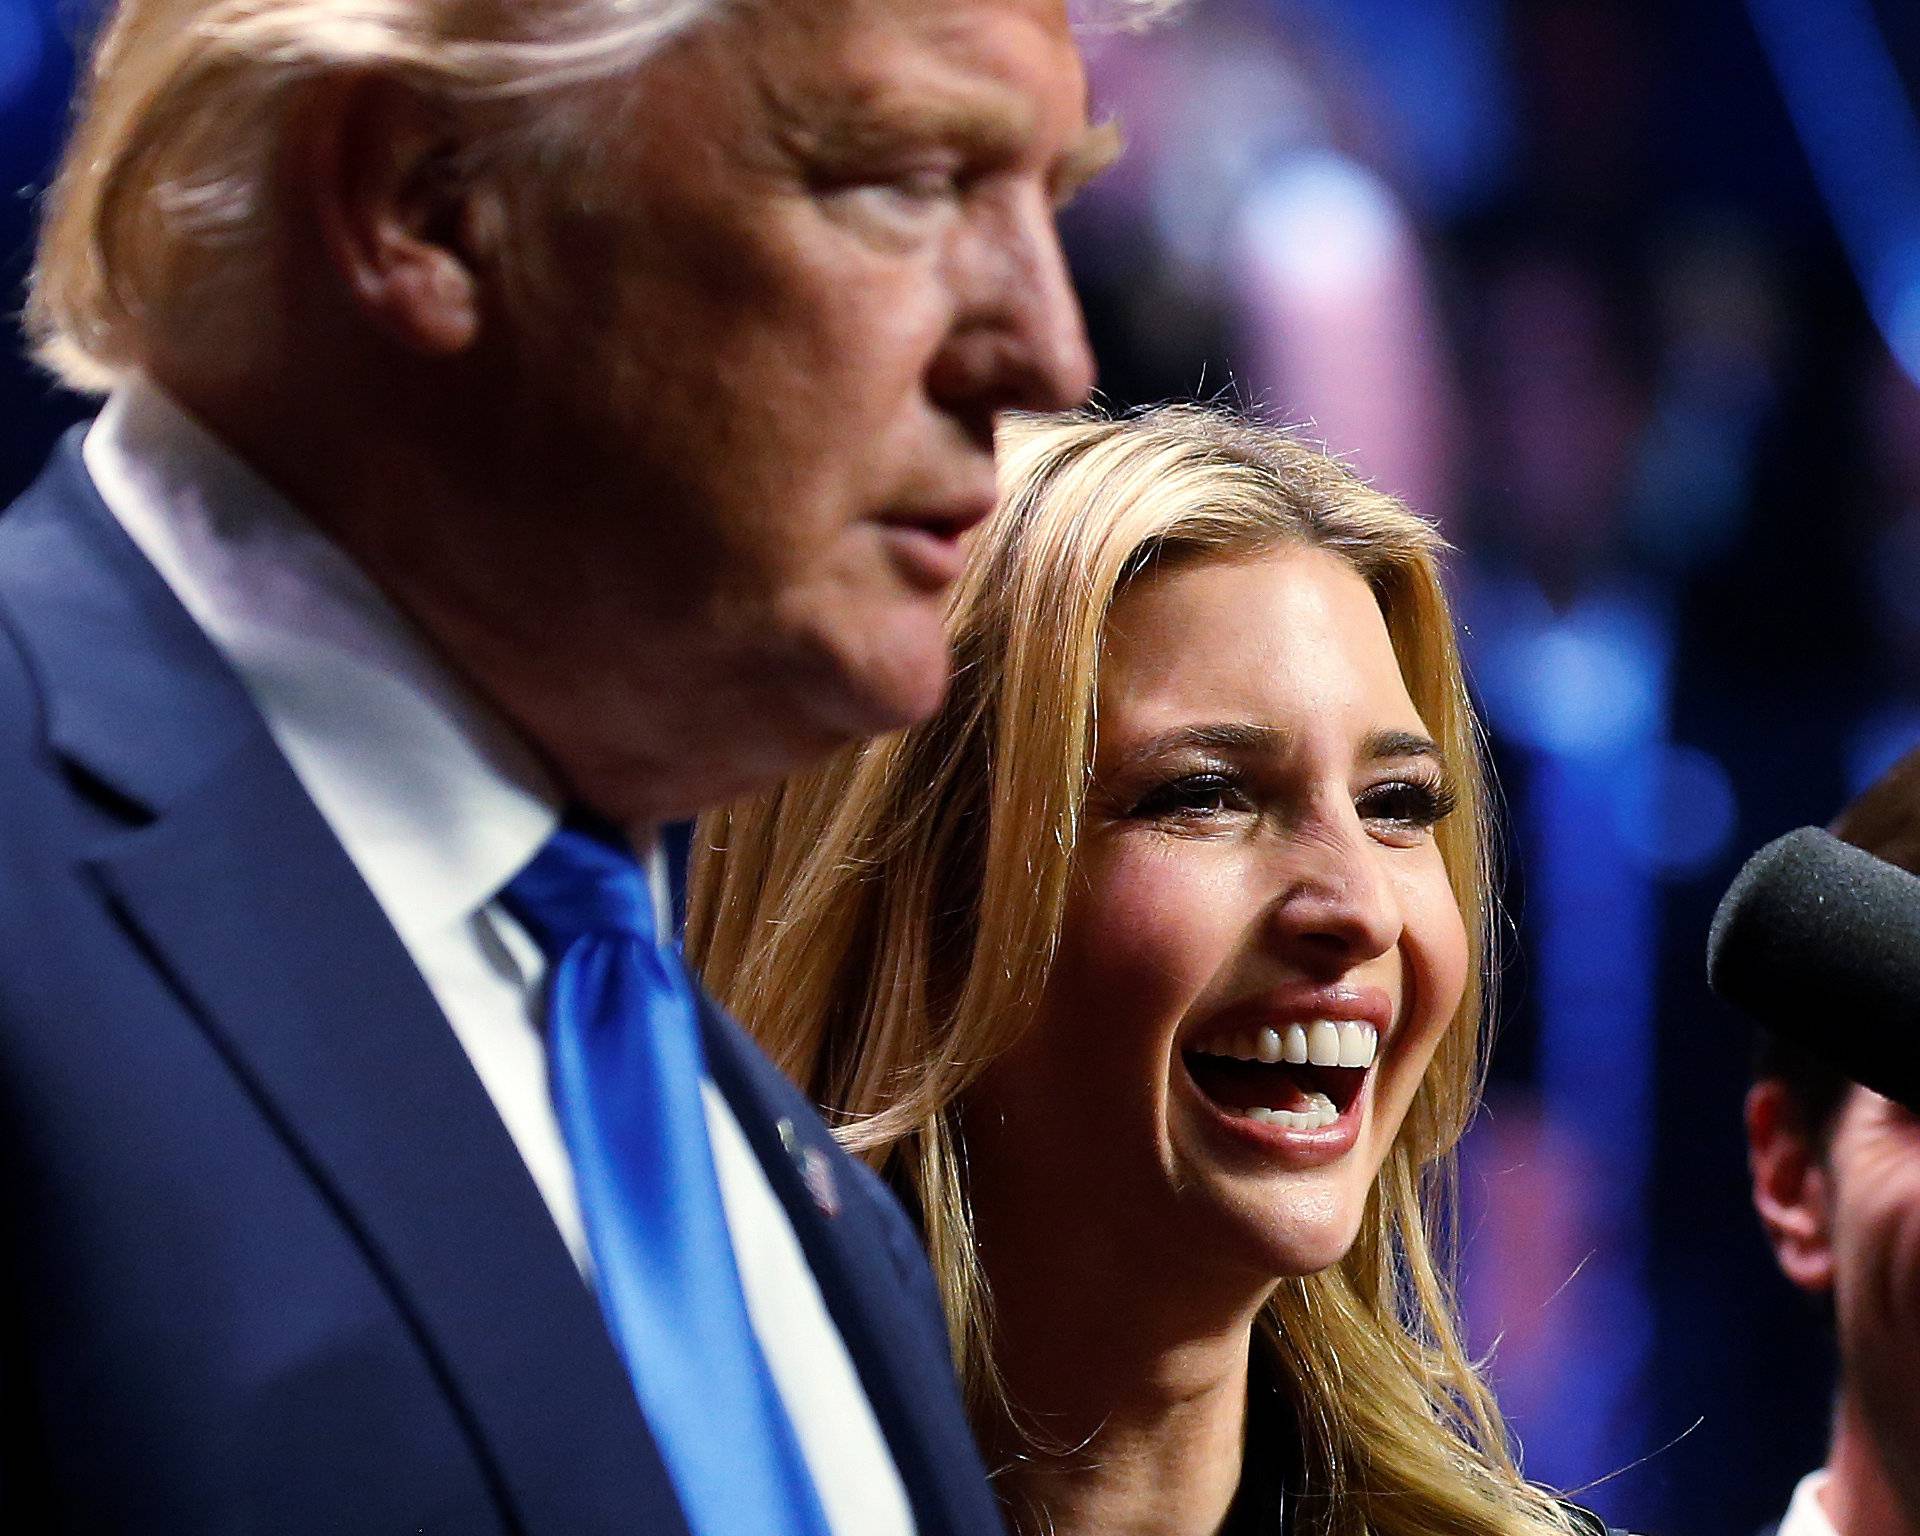 Republican presidential nominee Donald Trump and his daughter Ivanka Trump attend a campaign rally in Manchester